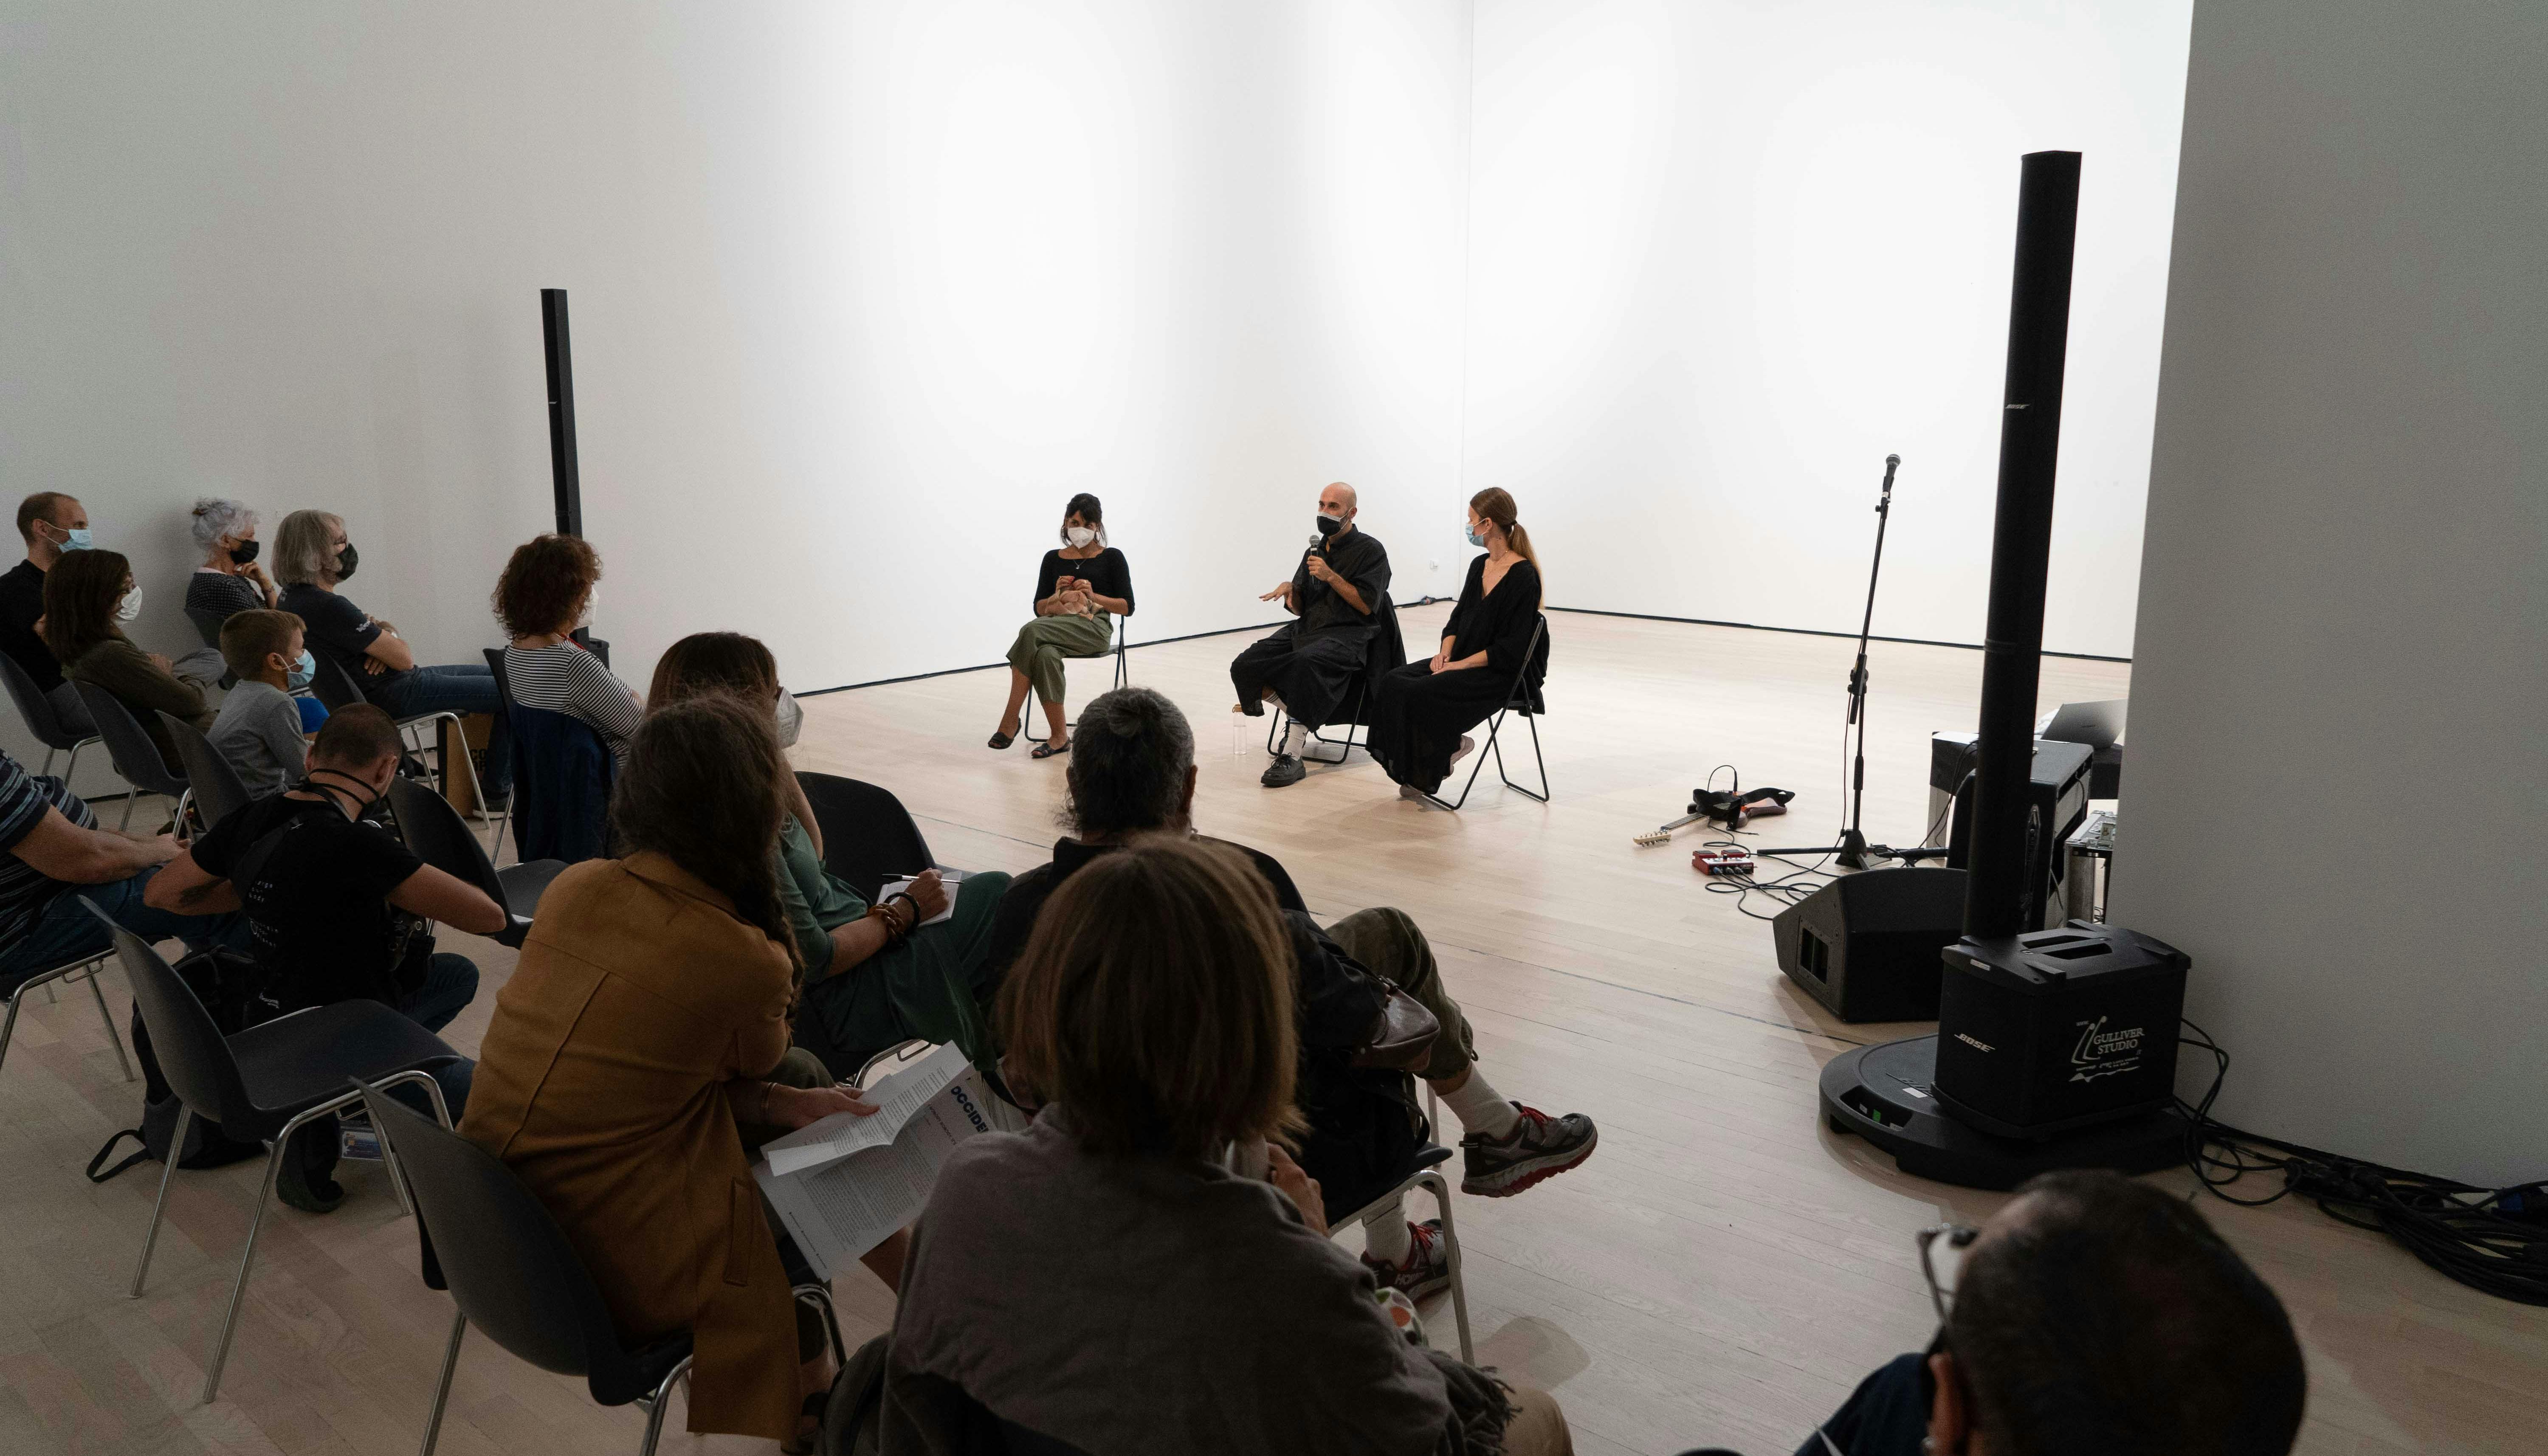 The choreographer Daniele Ninarello, the sociologist Mariella Popolla and the dramaturg Gaia Clorilde Chernetich are seated in the middle of the performance space, and are talking to the audience in front of them.